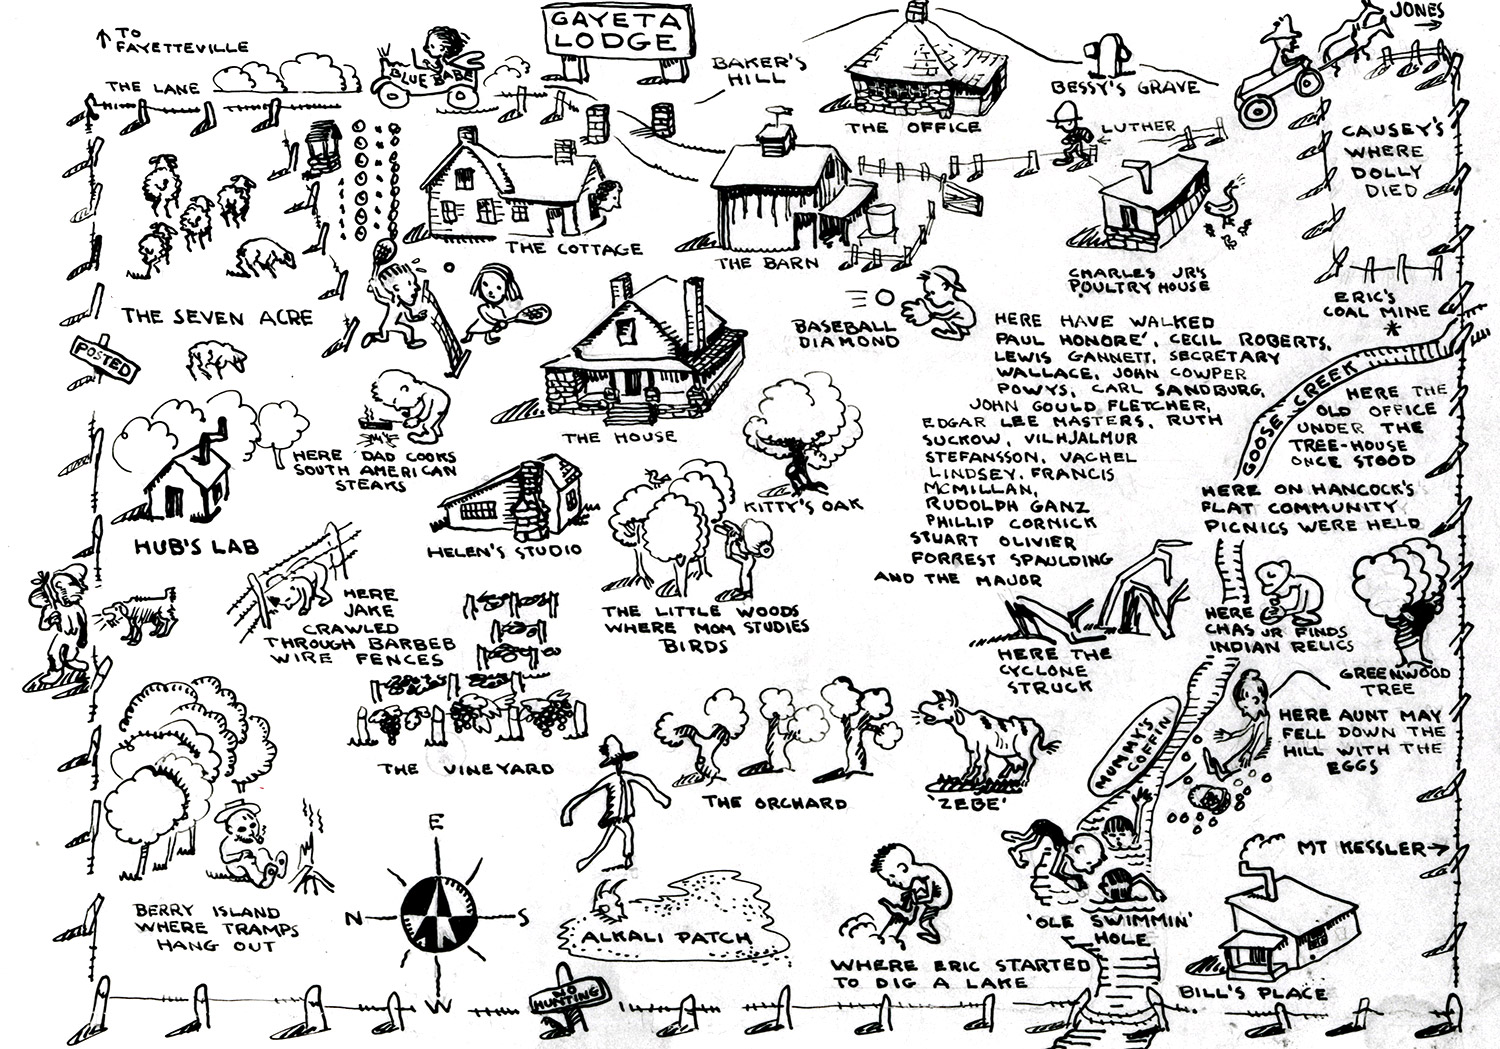 Hand-drawn map with various icons throughout